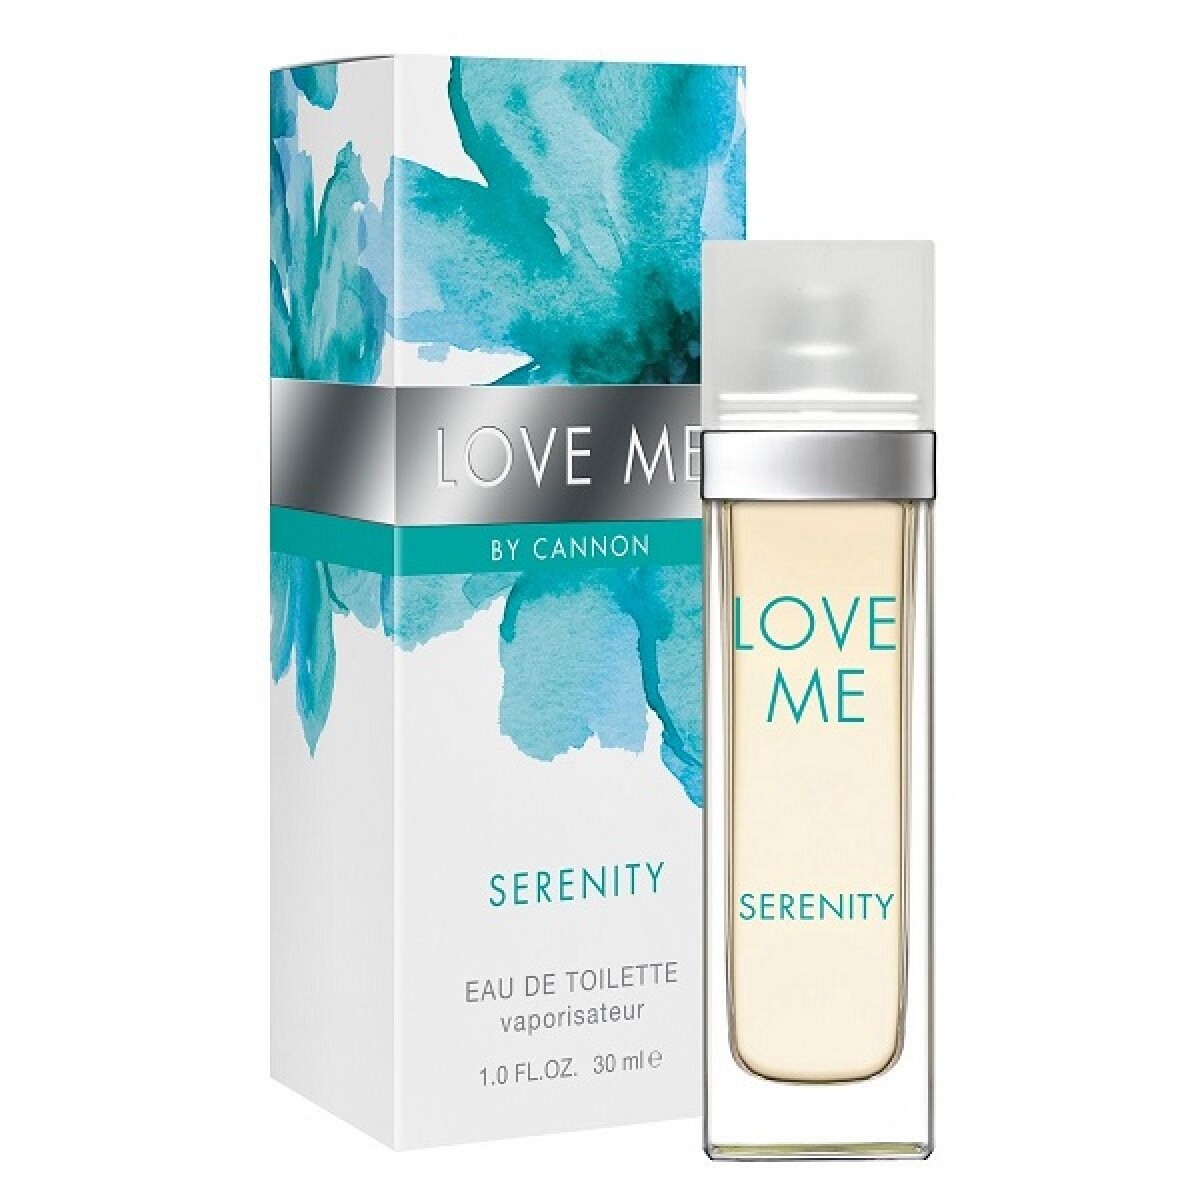 Perfume Love Me By Cannon Serenity Edt 30 Ml. 